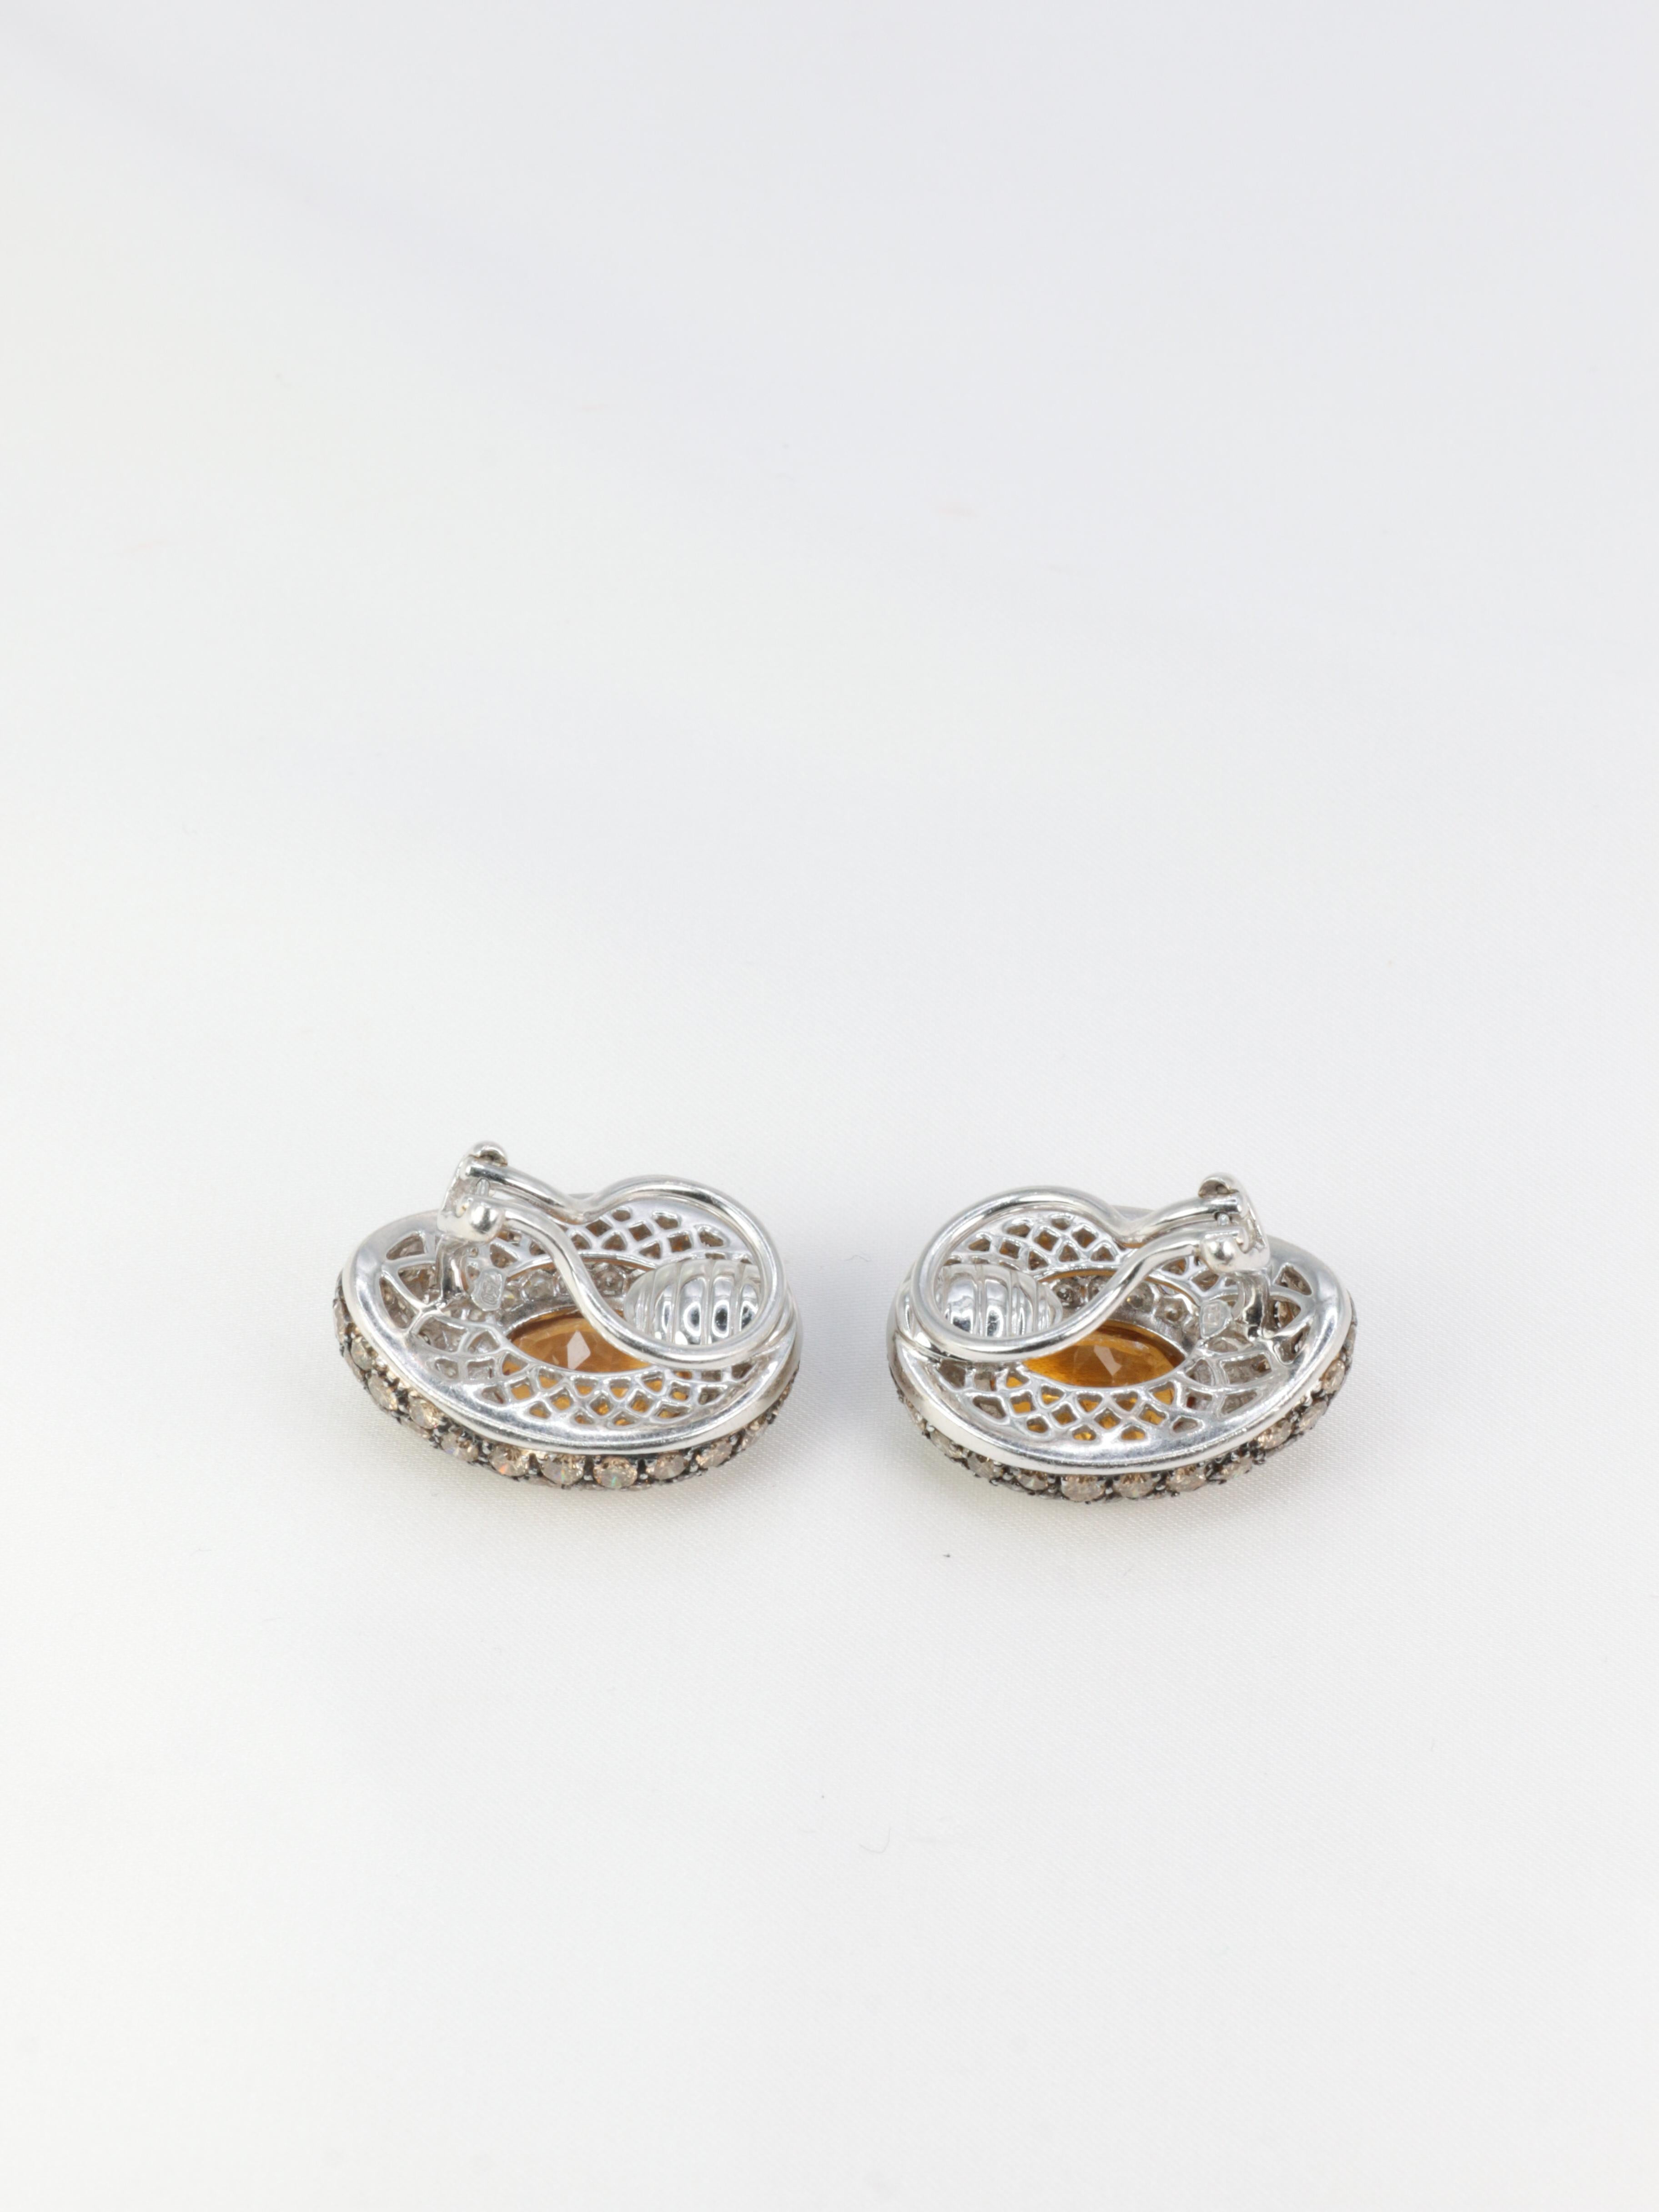 Women's or Men's Pair of Gold, Citrines, White and Champagne Diamonds Earrings For Sale